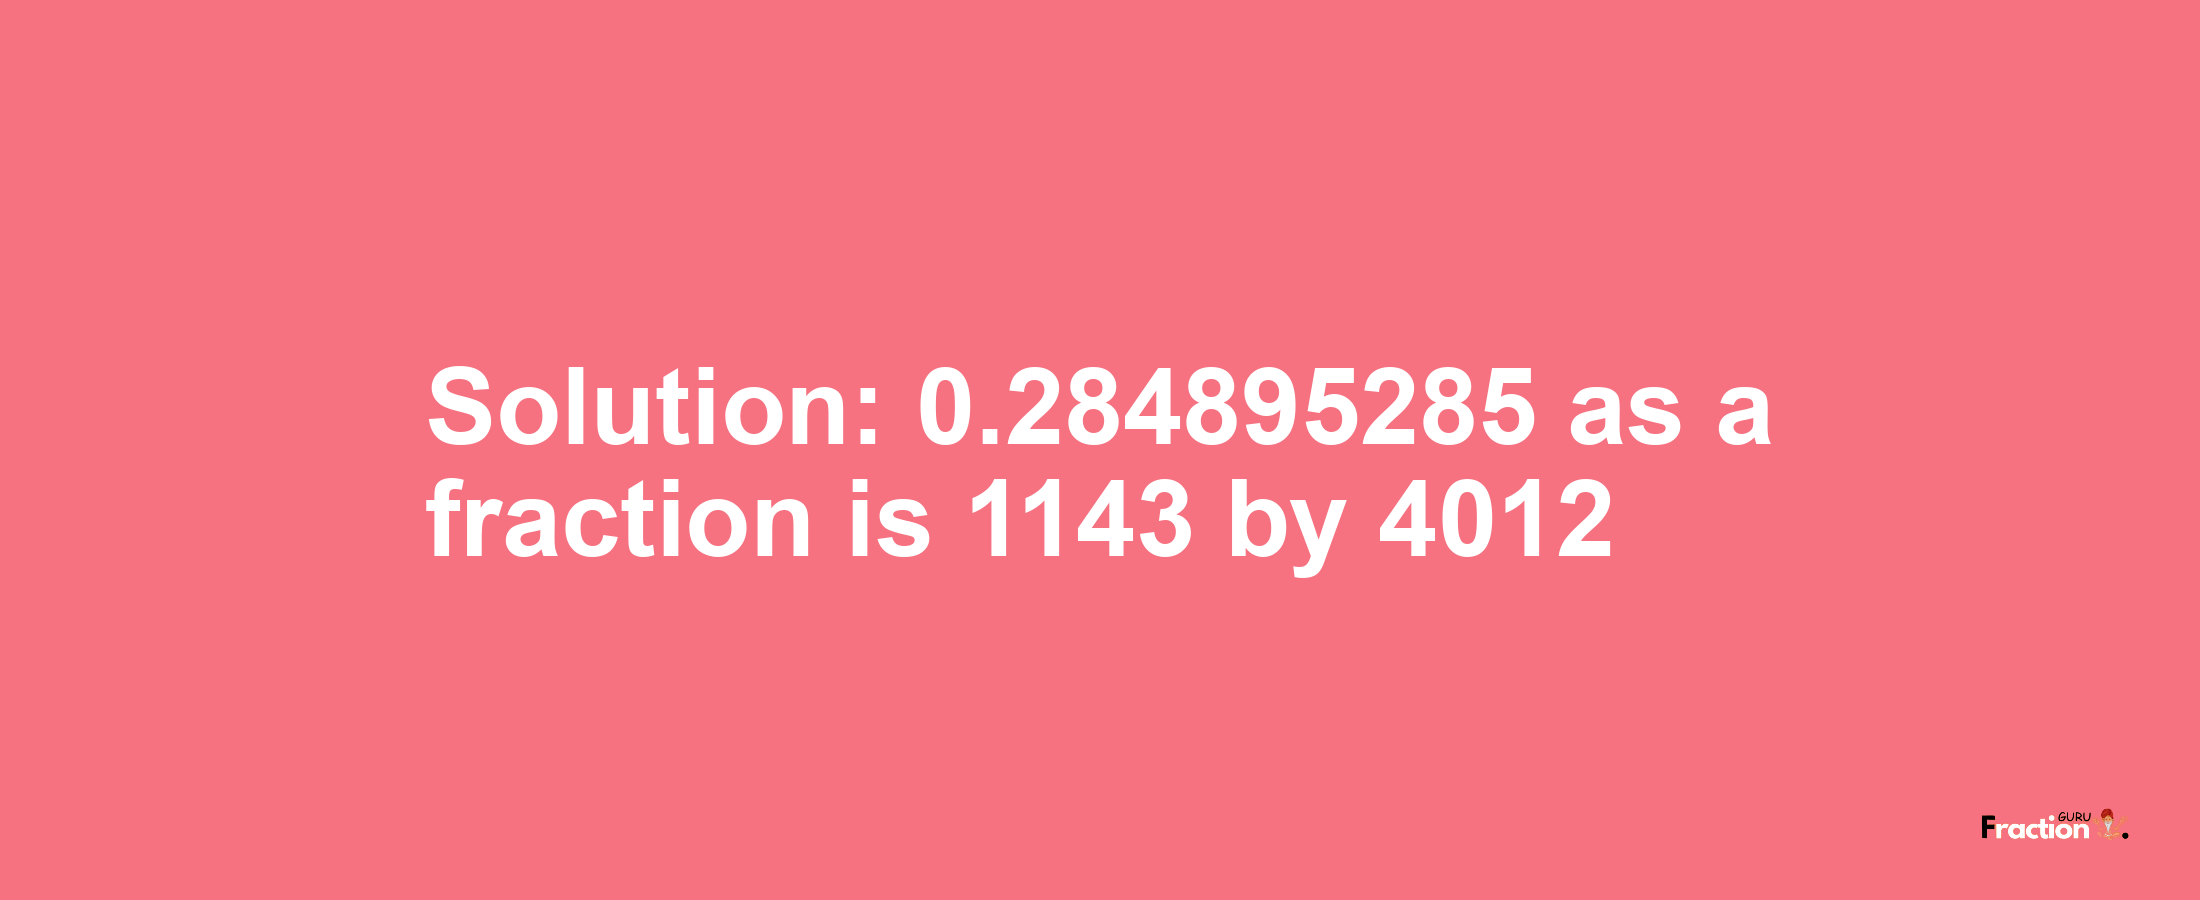 Solution:0.284895285 as a fraction is 1143/4012